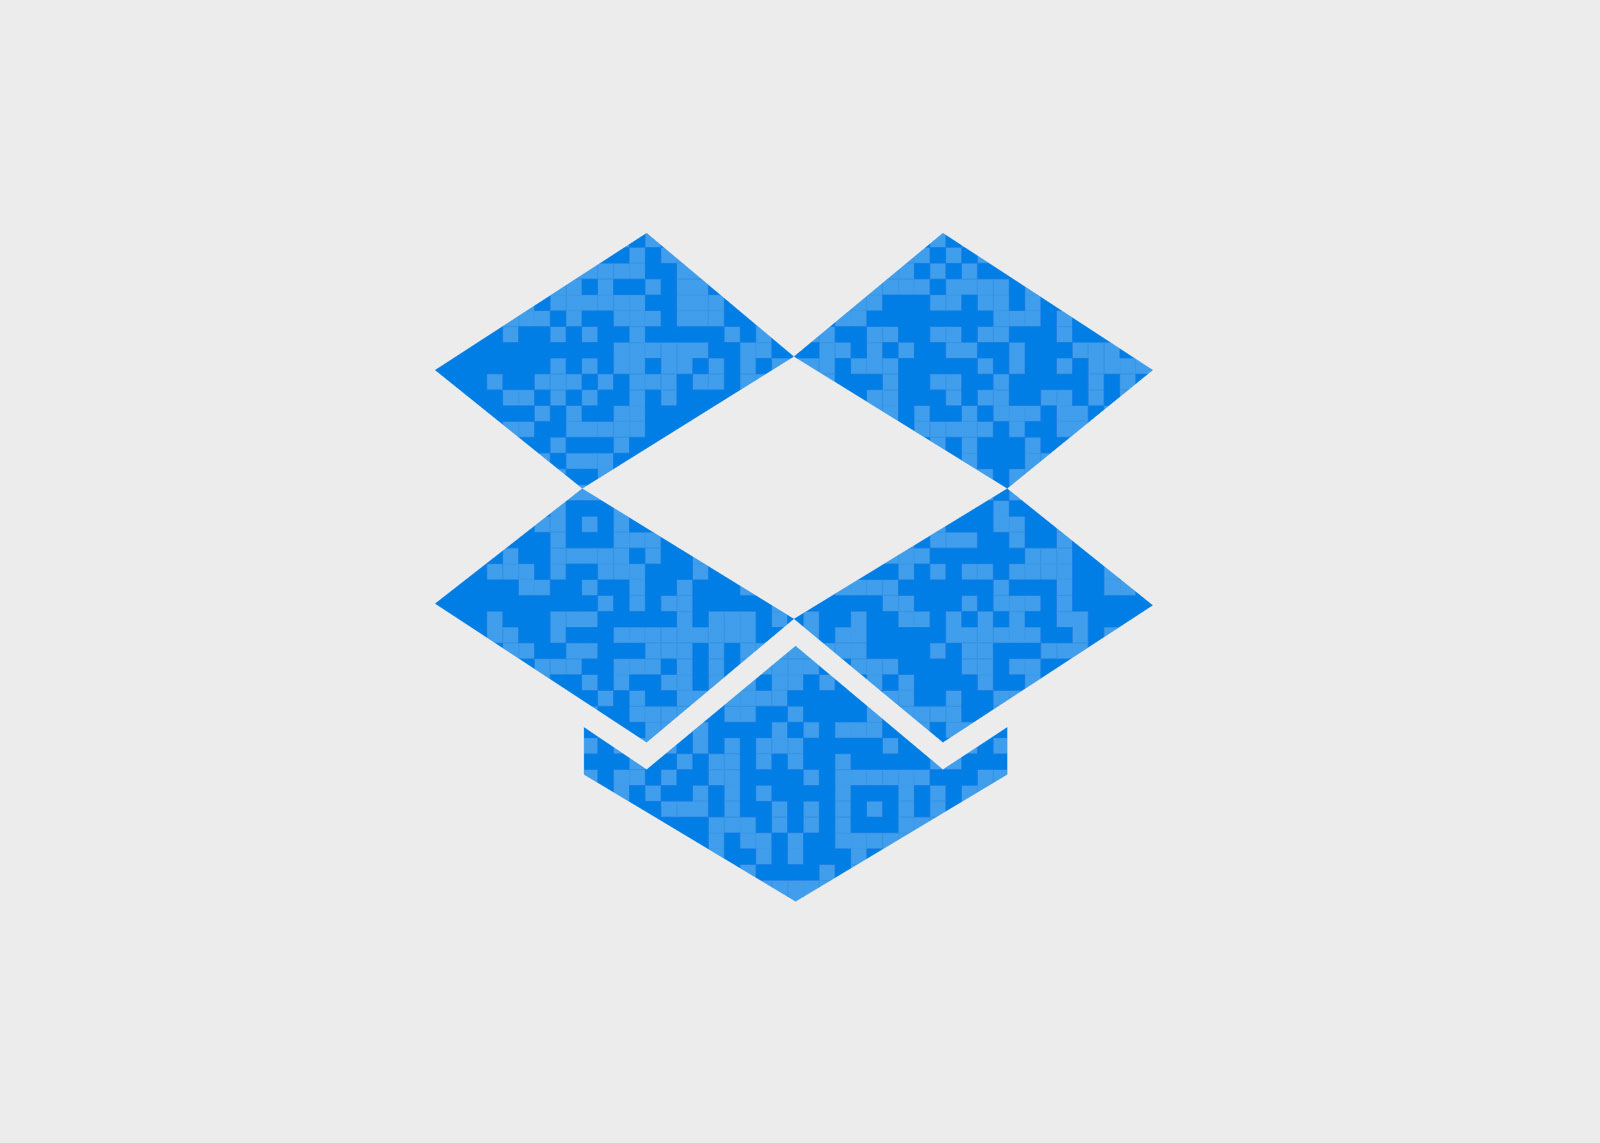 How to use QR Codes for Dropbox